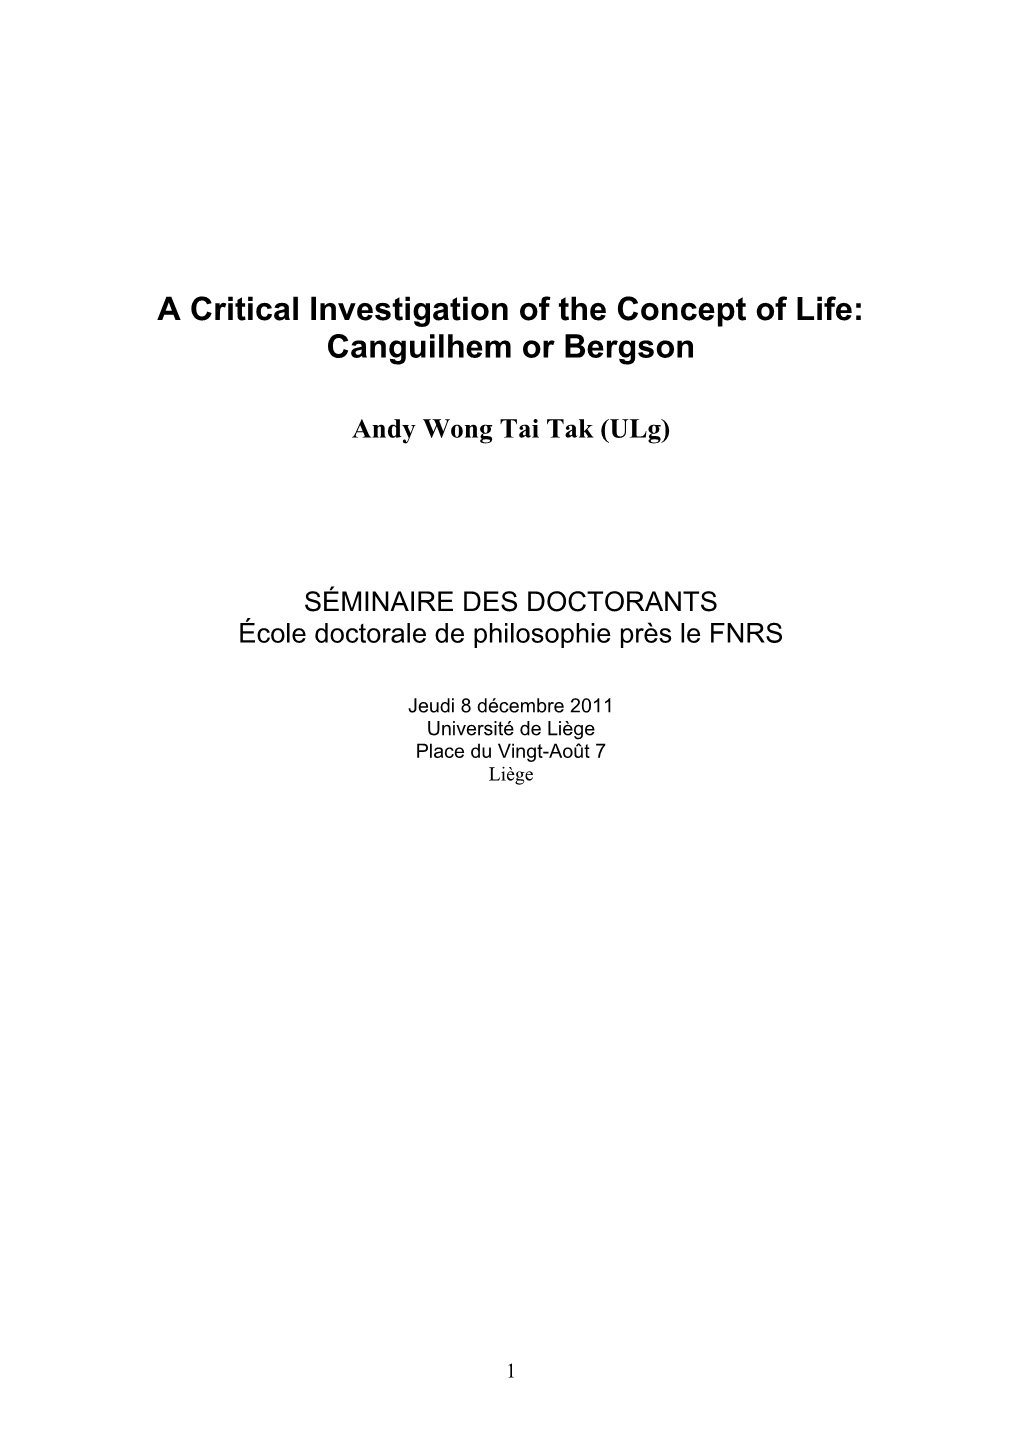 A Critical Investigation of the Concept of Life